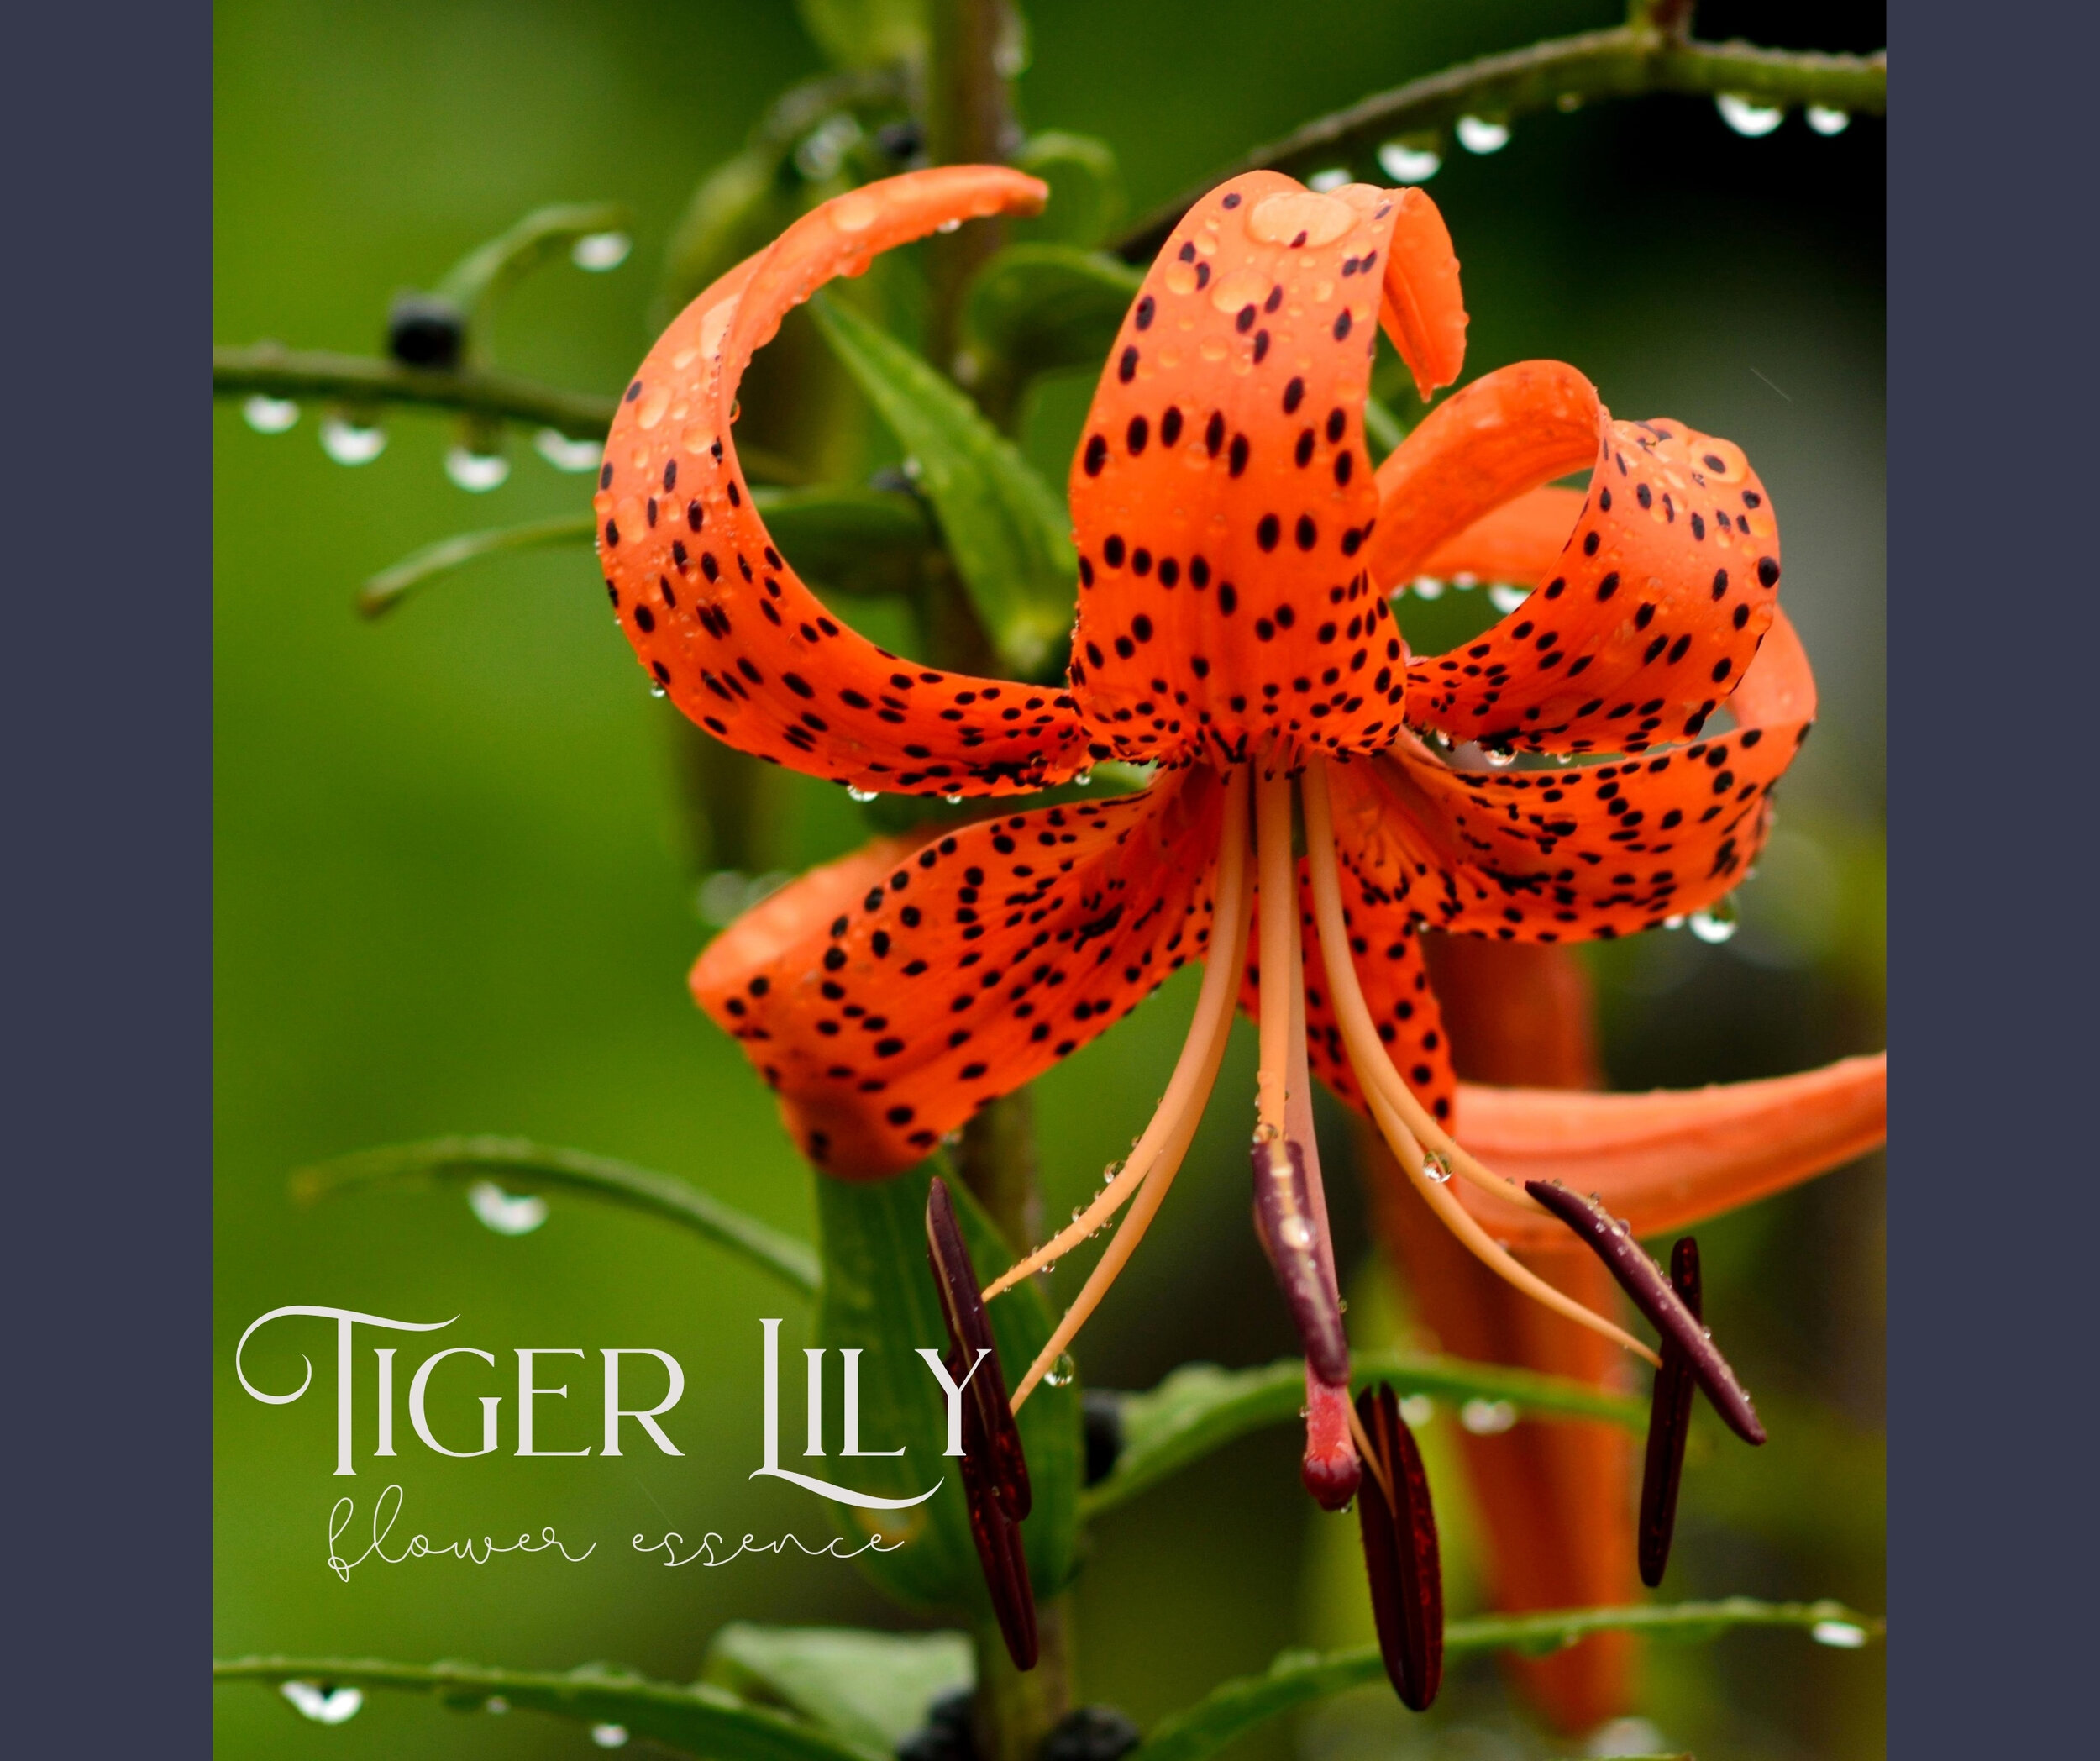 Tiger Lily Essence Cover Photo.jpg